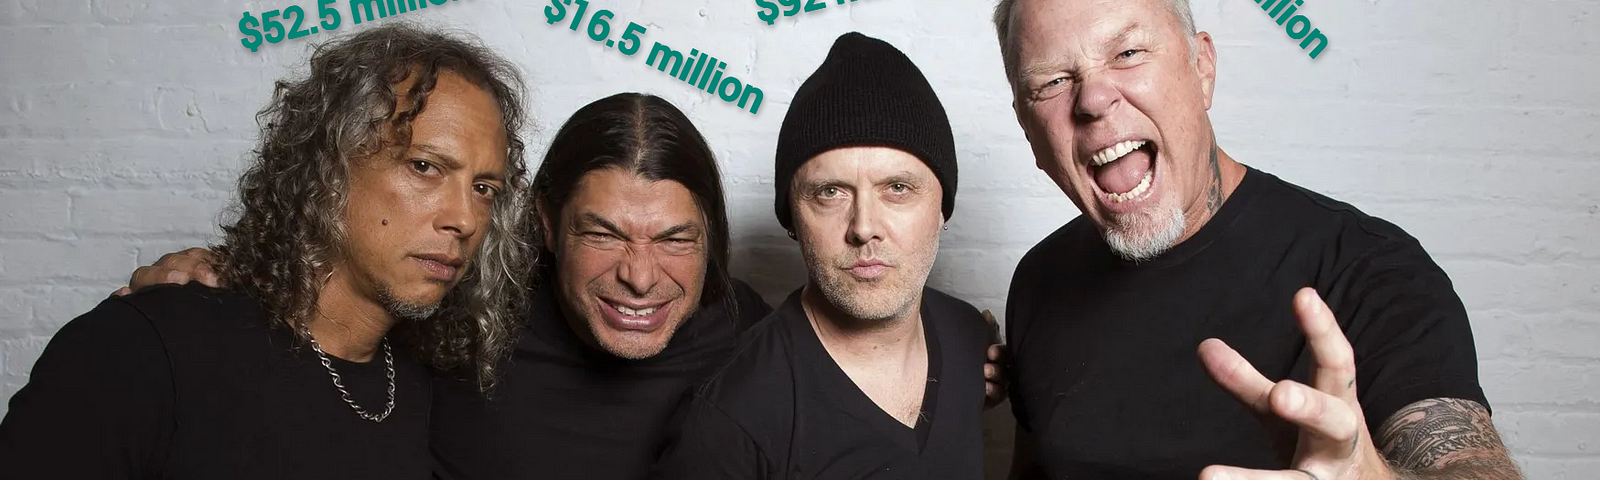 Metallica band mates and their brand values